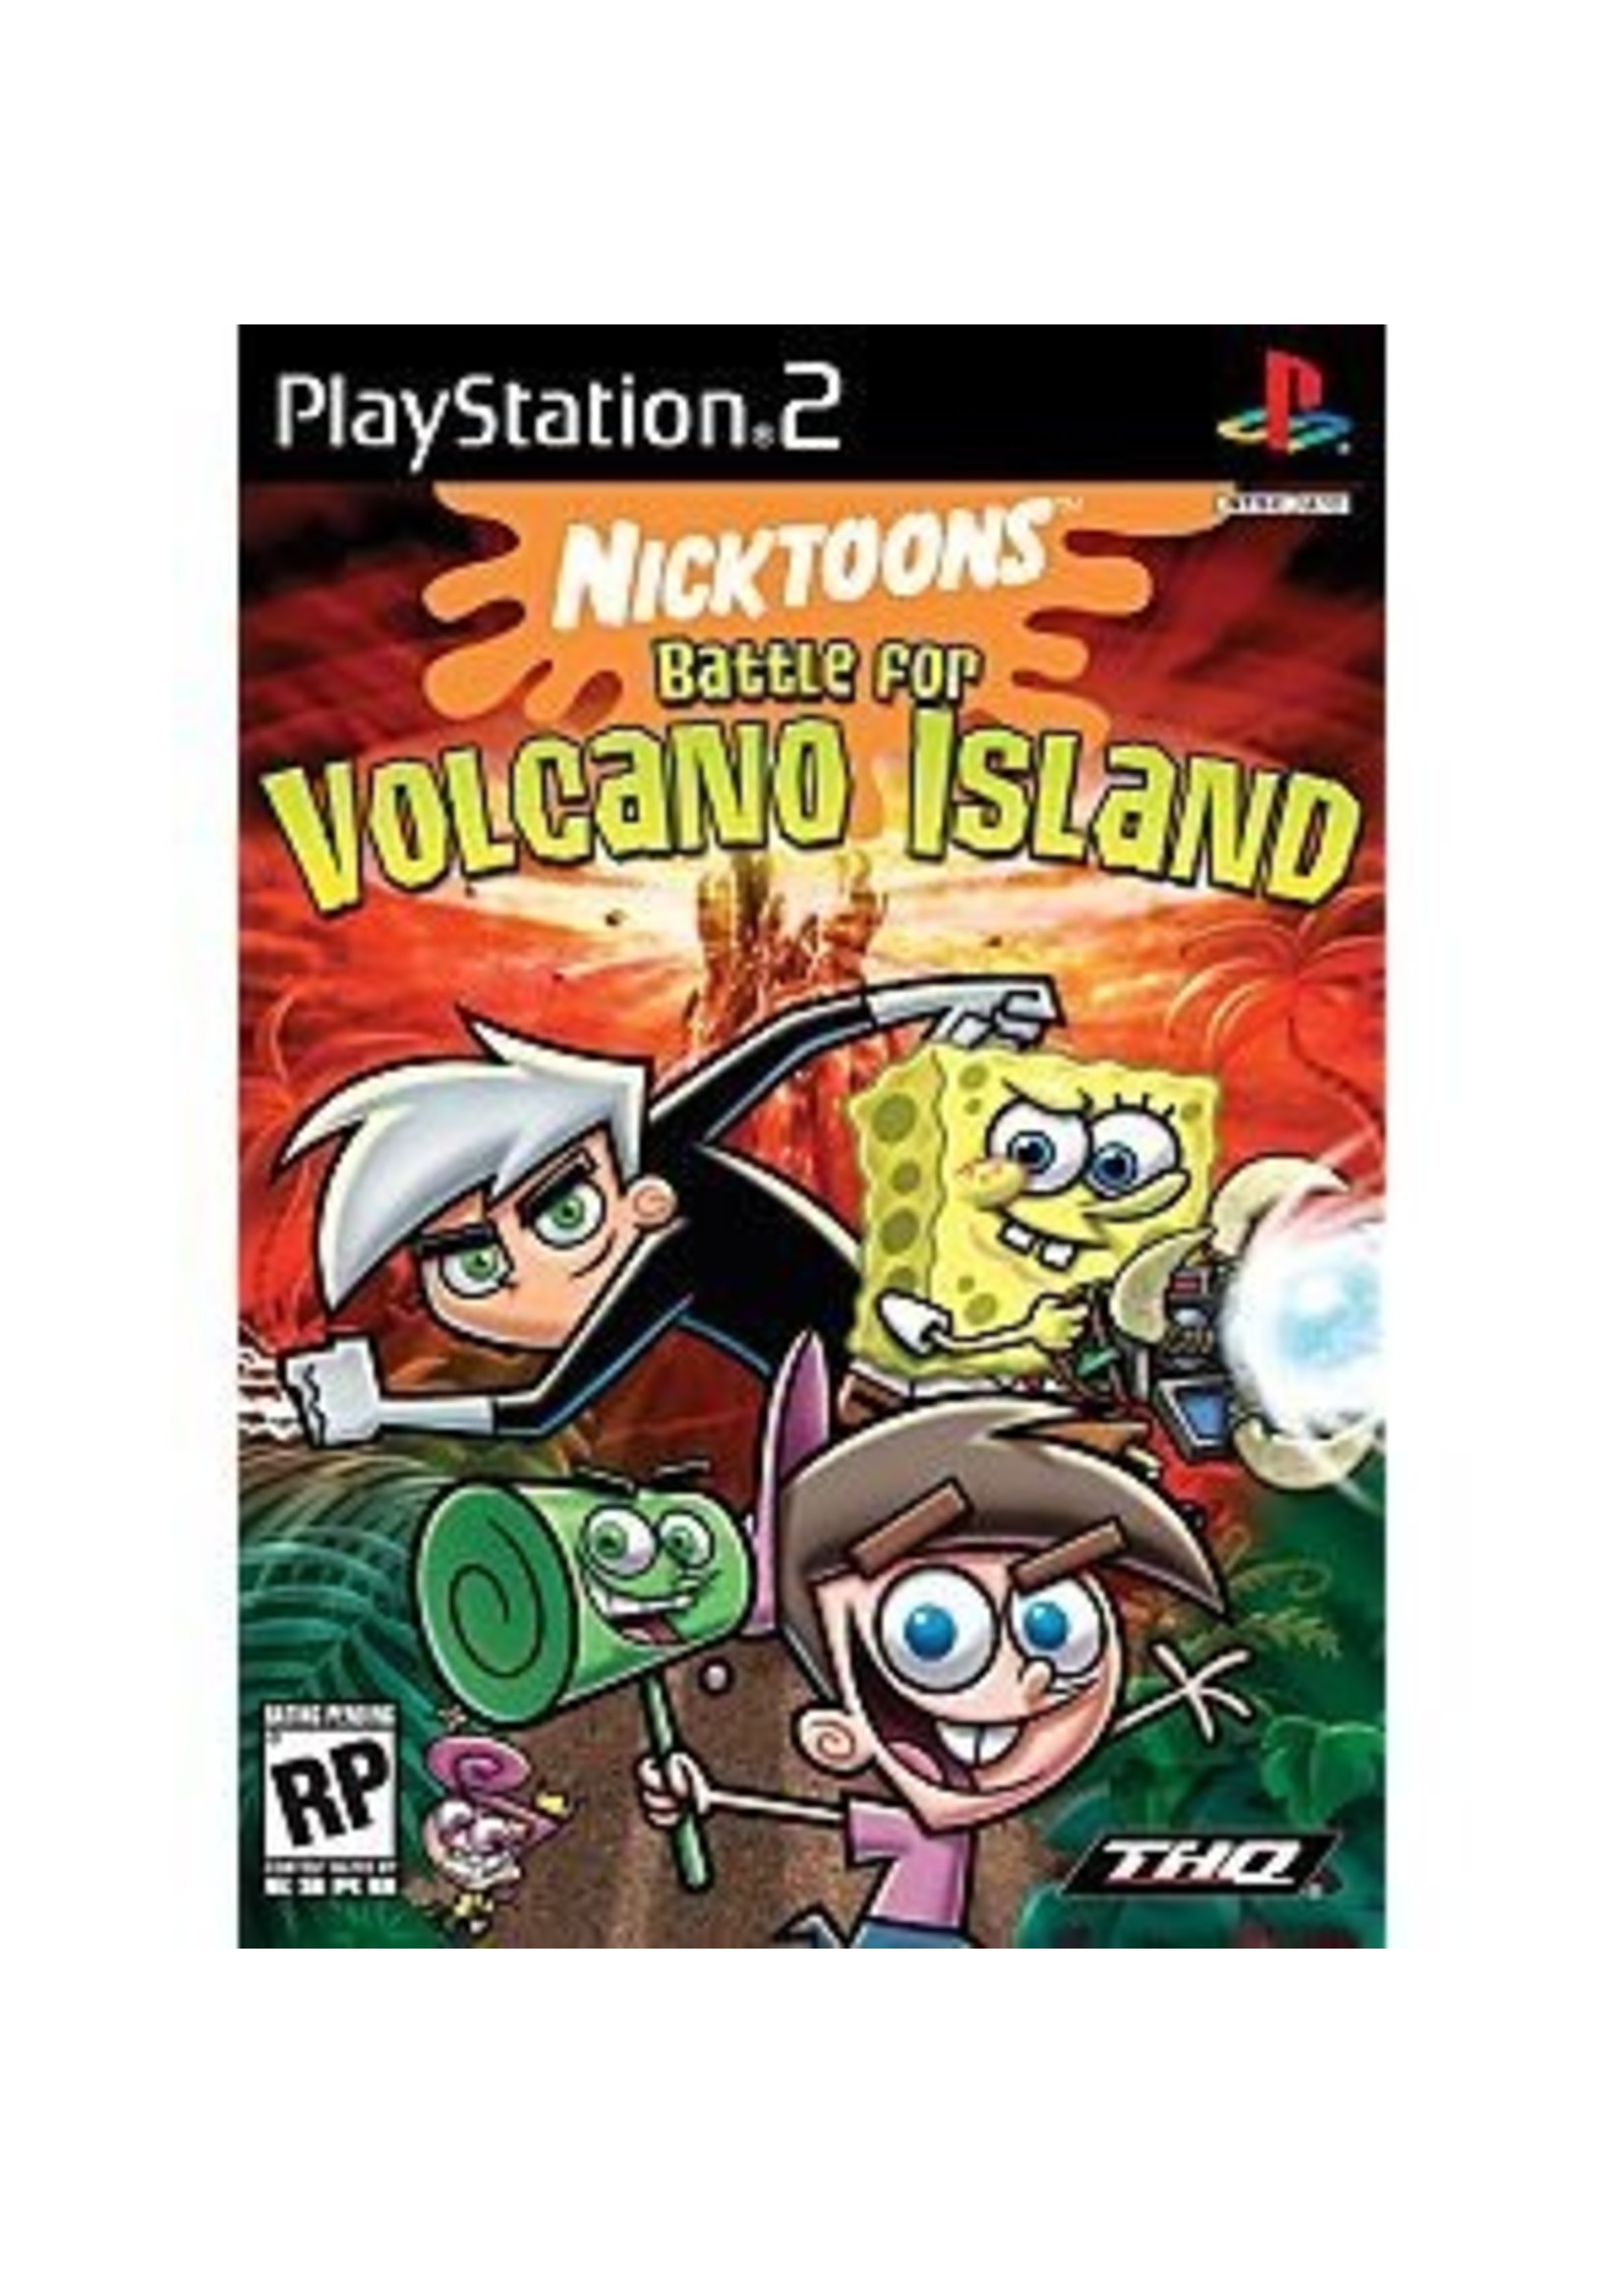 Sony Playstation 2 (PS2) Nicktoons Battle for Volcano Island